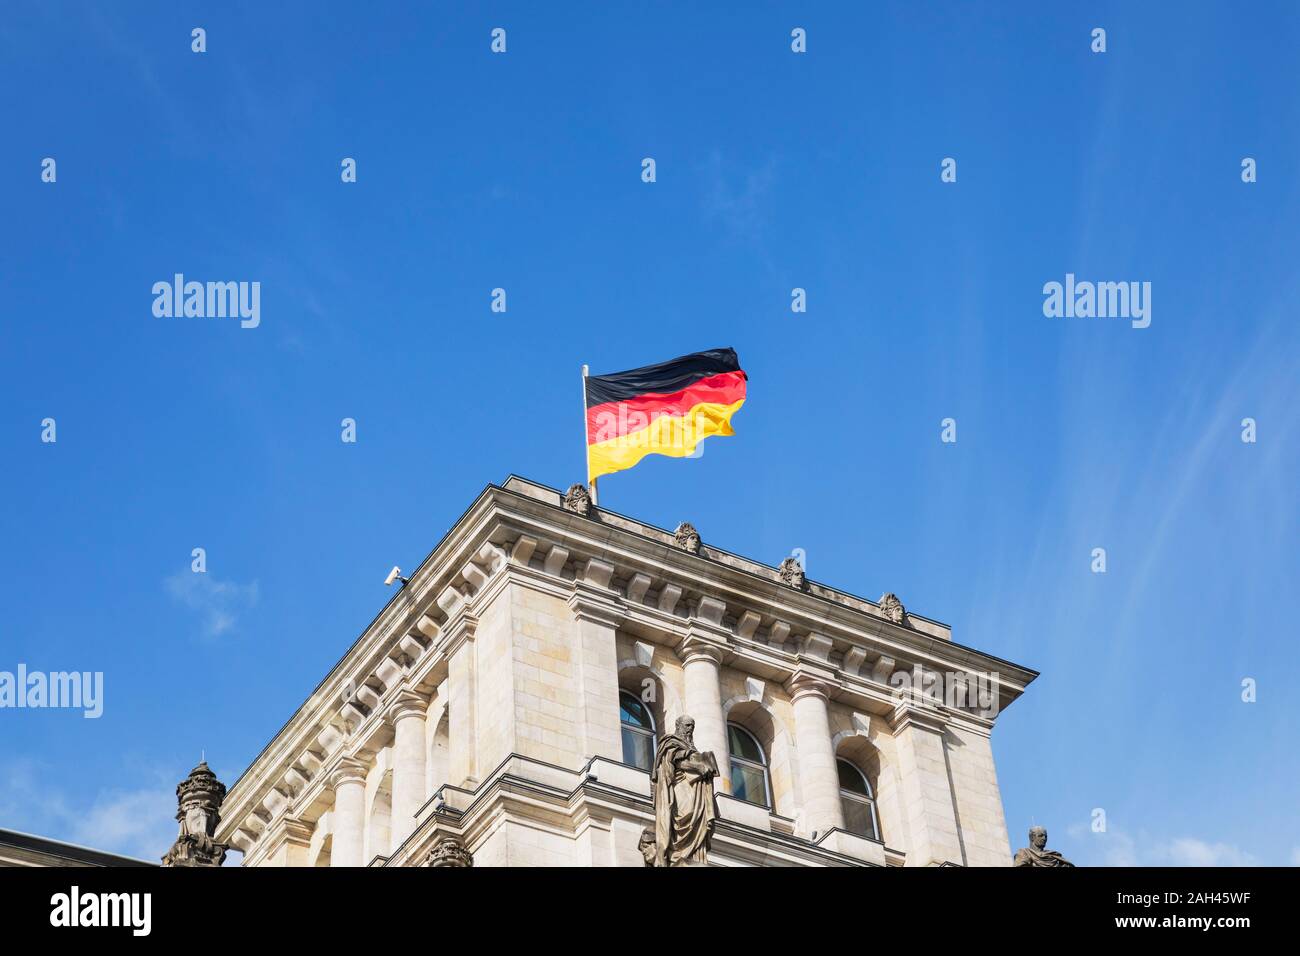 Germany, Berlin, German flag on top of Reichstag building Stock Photo